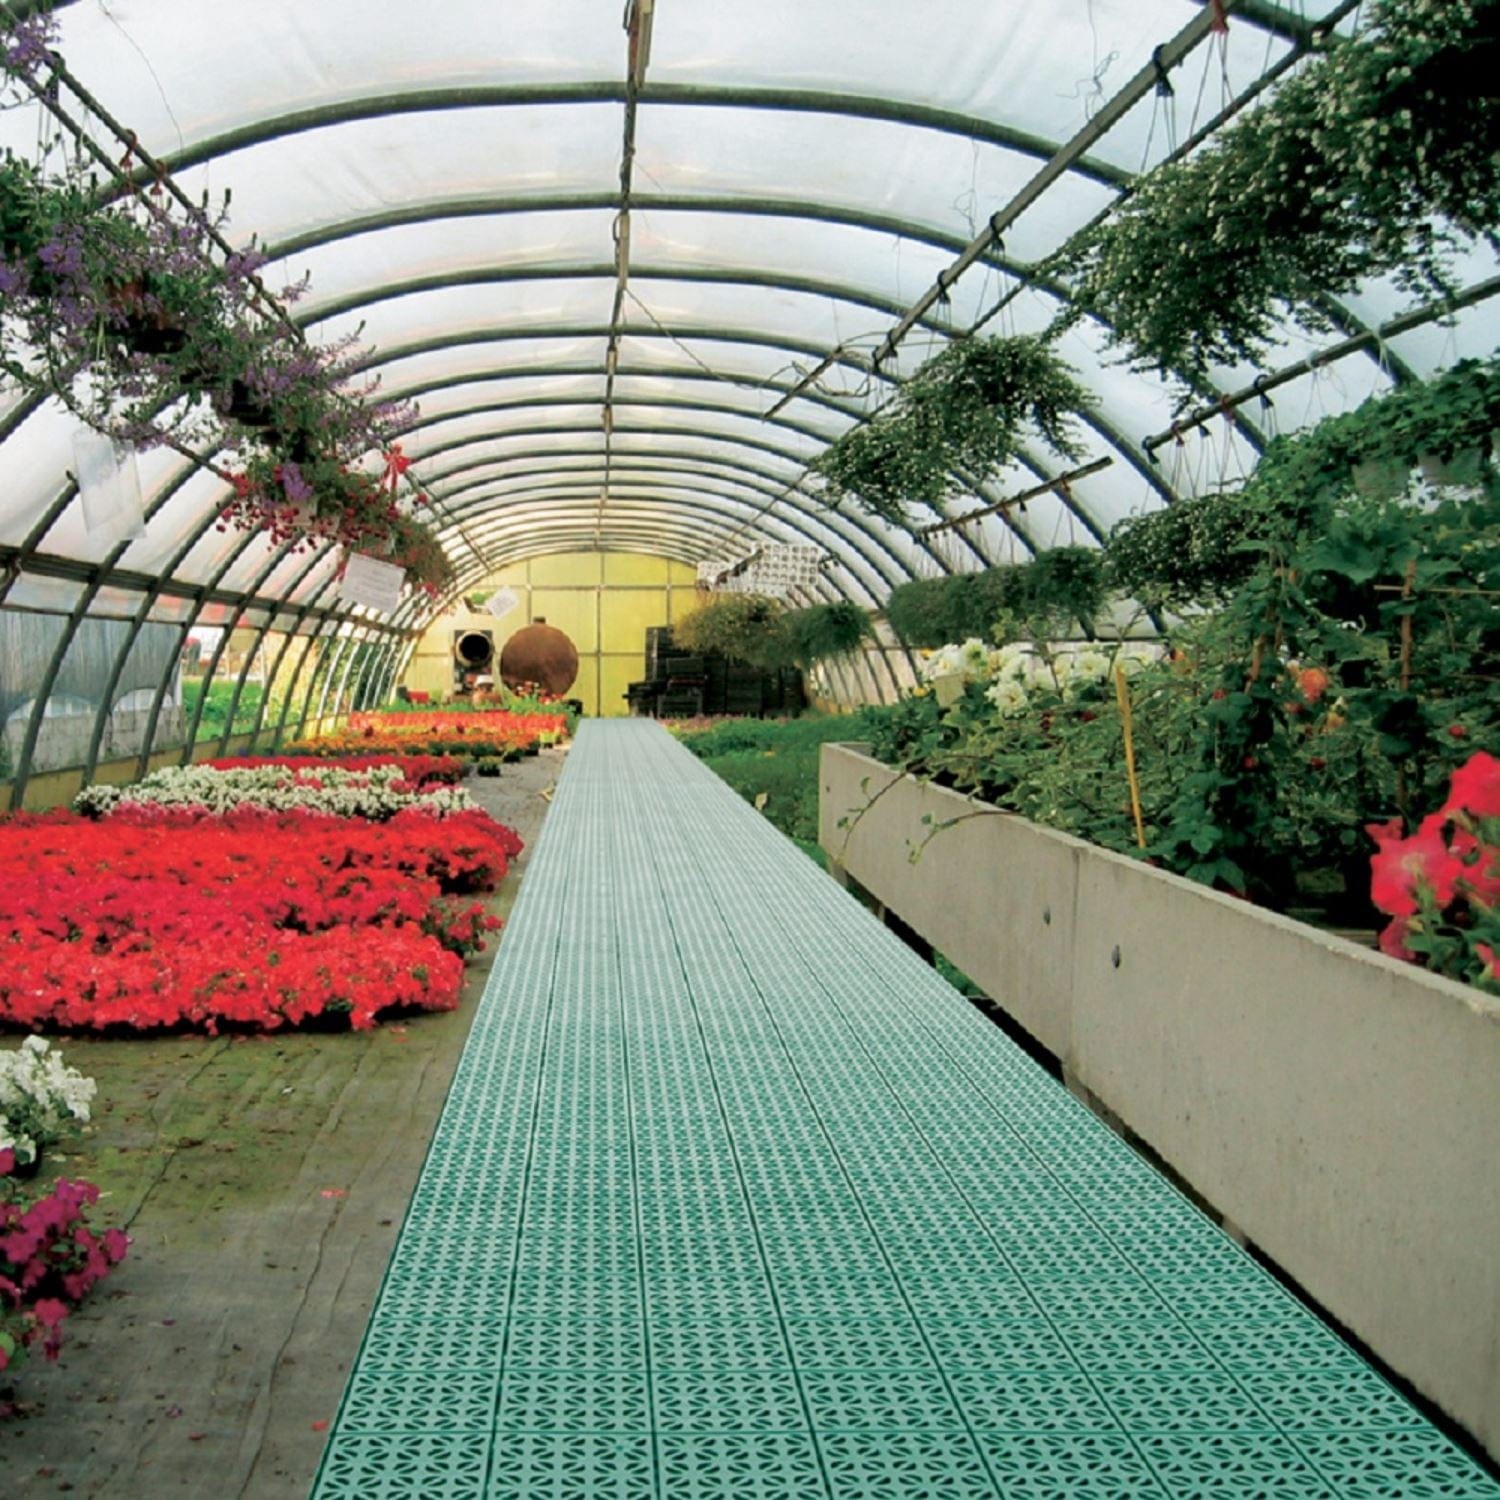 Riverstone Industries Greenhouse Accessories Riverstone | MONT 24' Greenhouse Interlocking Flooring System - 63 Tiles Kit